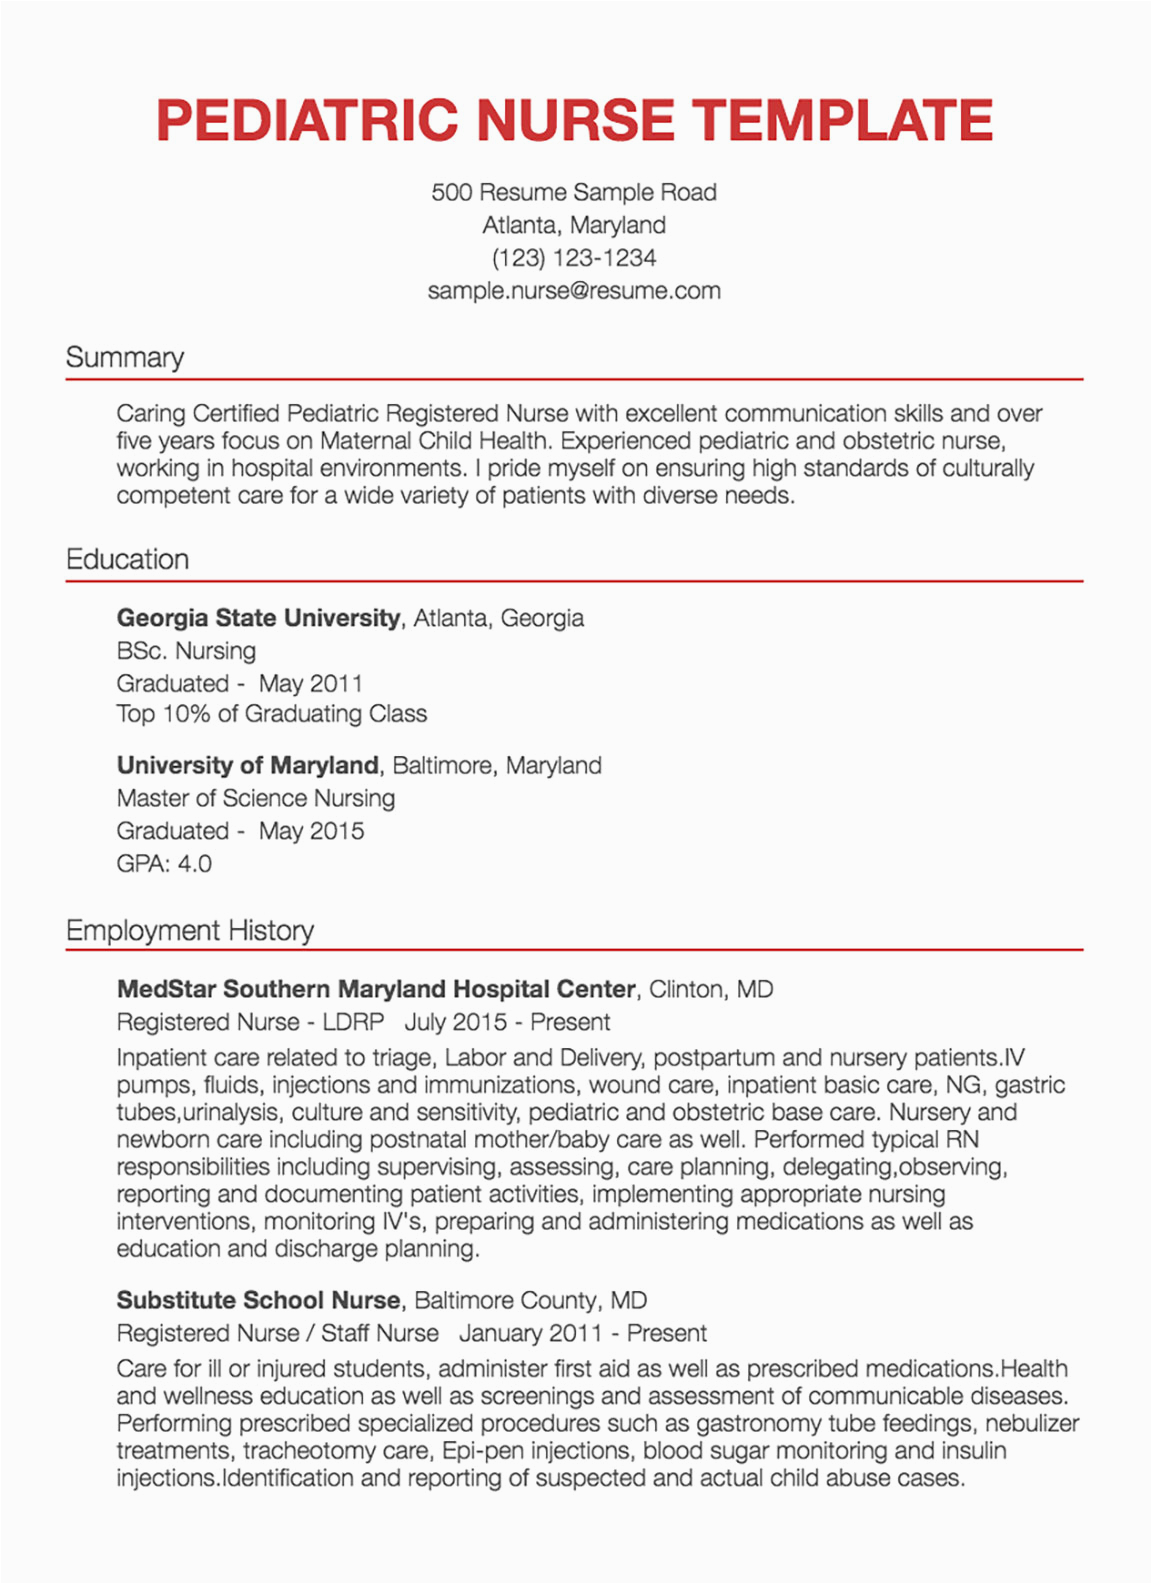 Samples for A Medical Nurse Resume 30 Nursing Resume Examples & Samples Written by Rn Managers